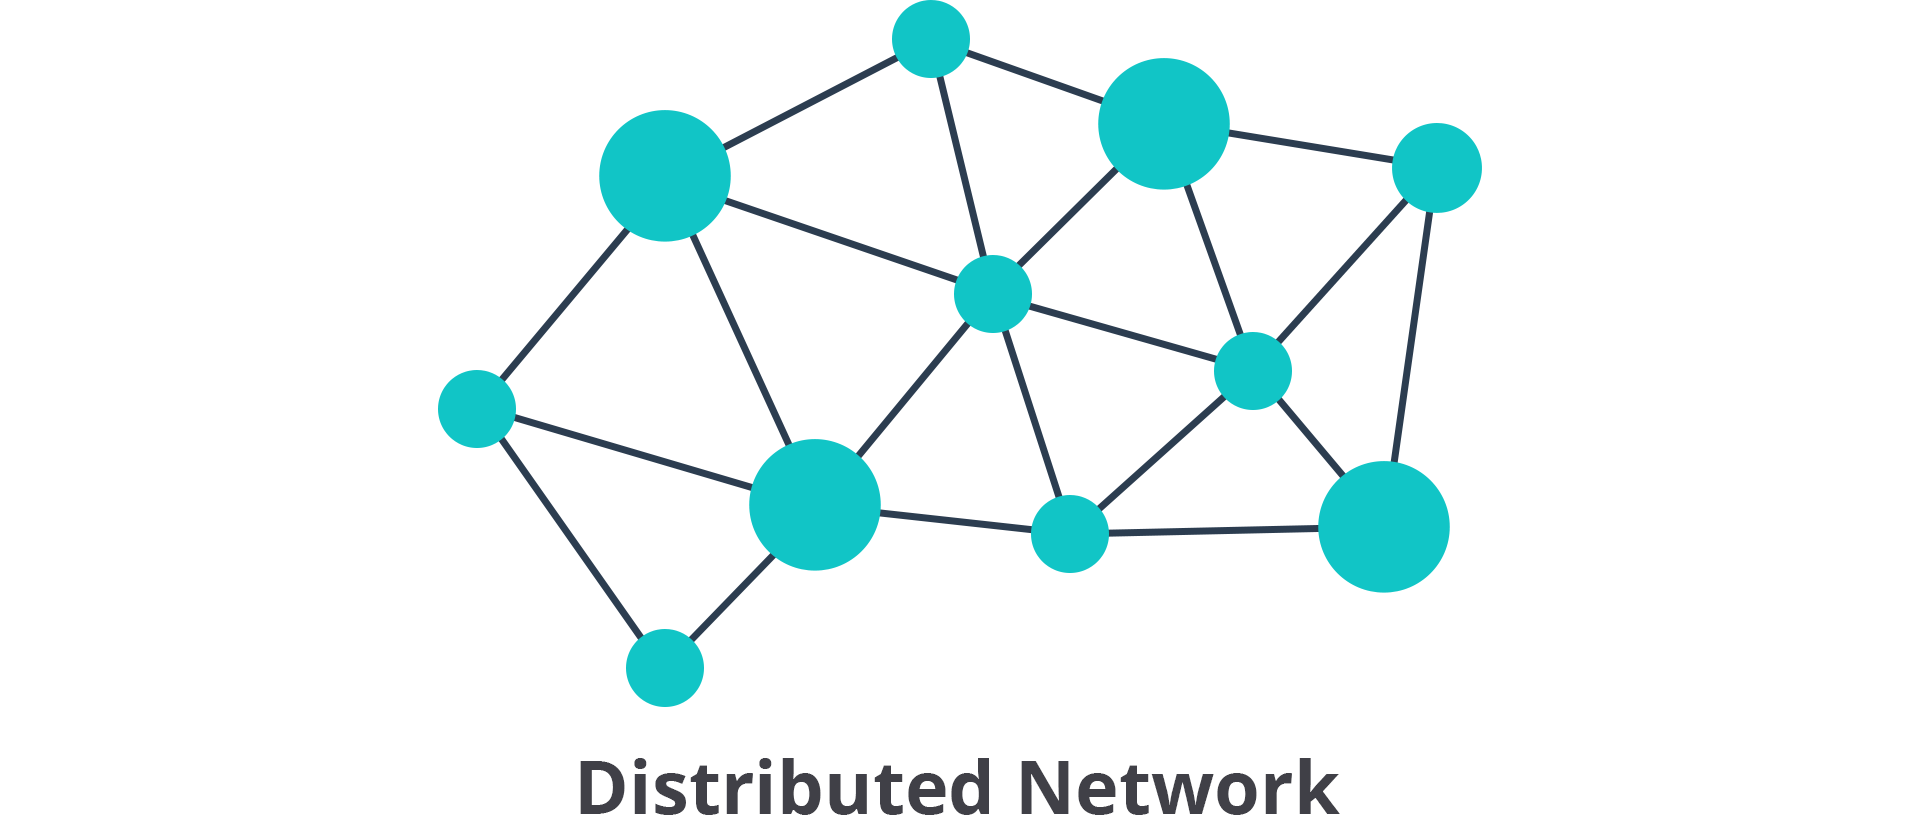 Konsep Distributed Networking